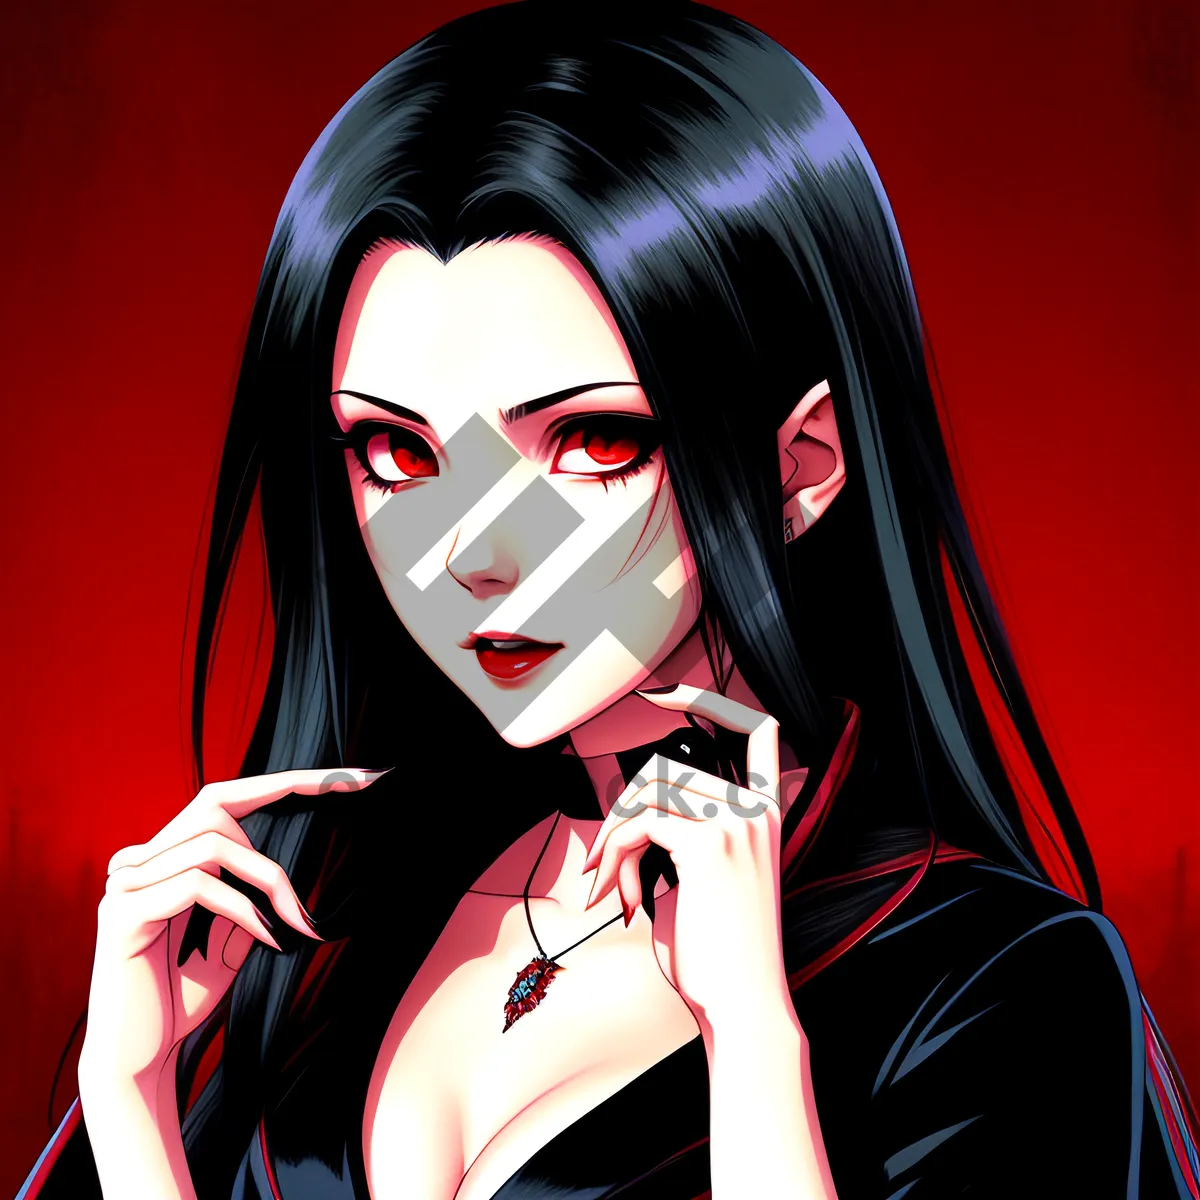 Picture of Sultry Sorceress: Attractive Black Haired Lady with Sexy Makeup and Sensual Gaze